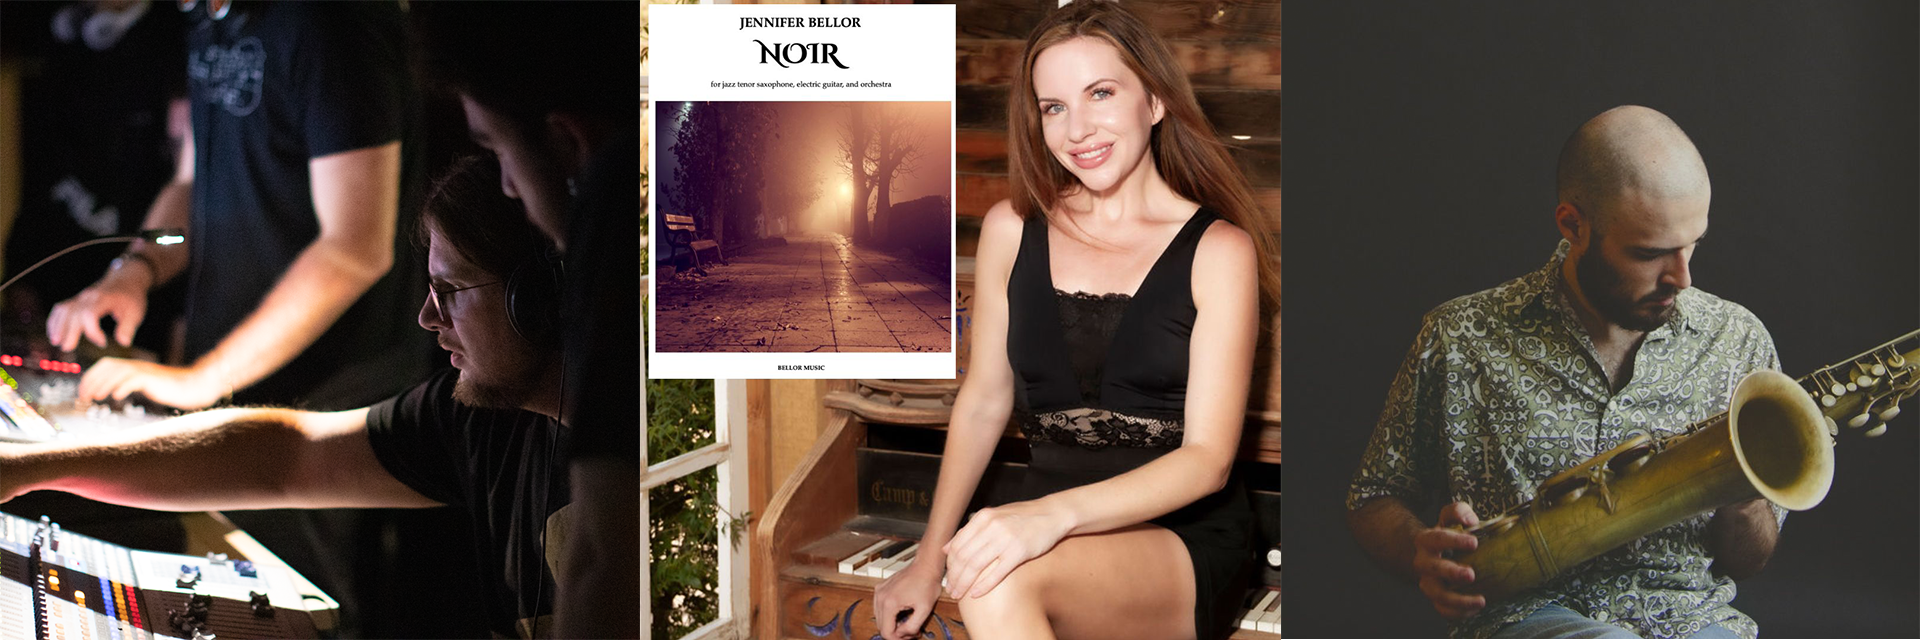 Composite image featuring photos of Nat Condit-Schultz at a mixing console; Jennifer Bellor in a publicity photo for her new piece, "Noir;" and Daniel Juárez with saxophone